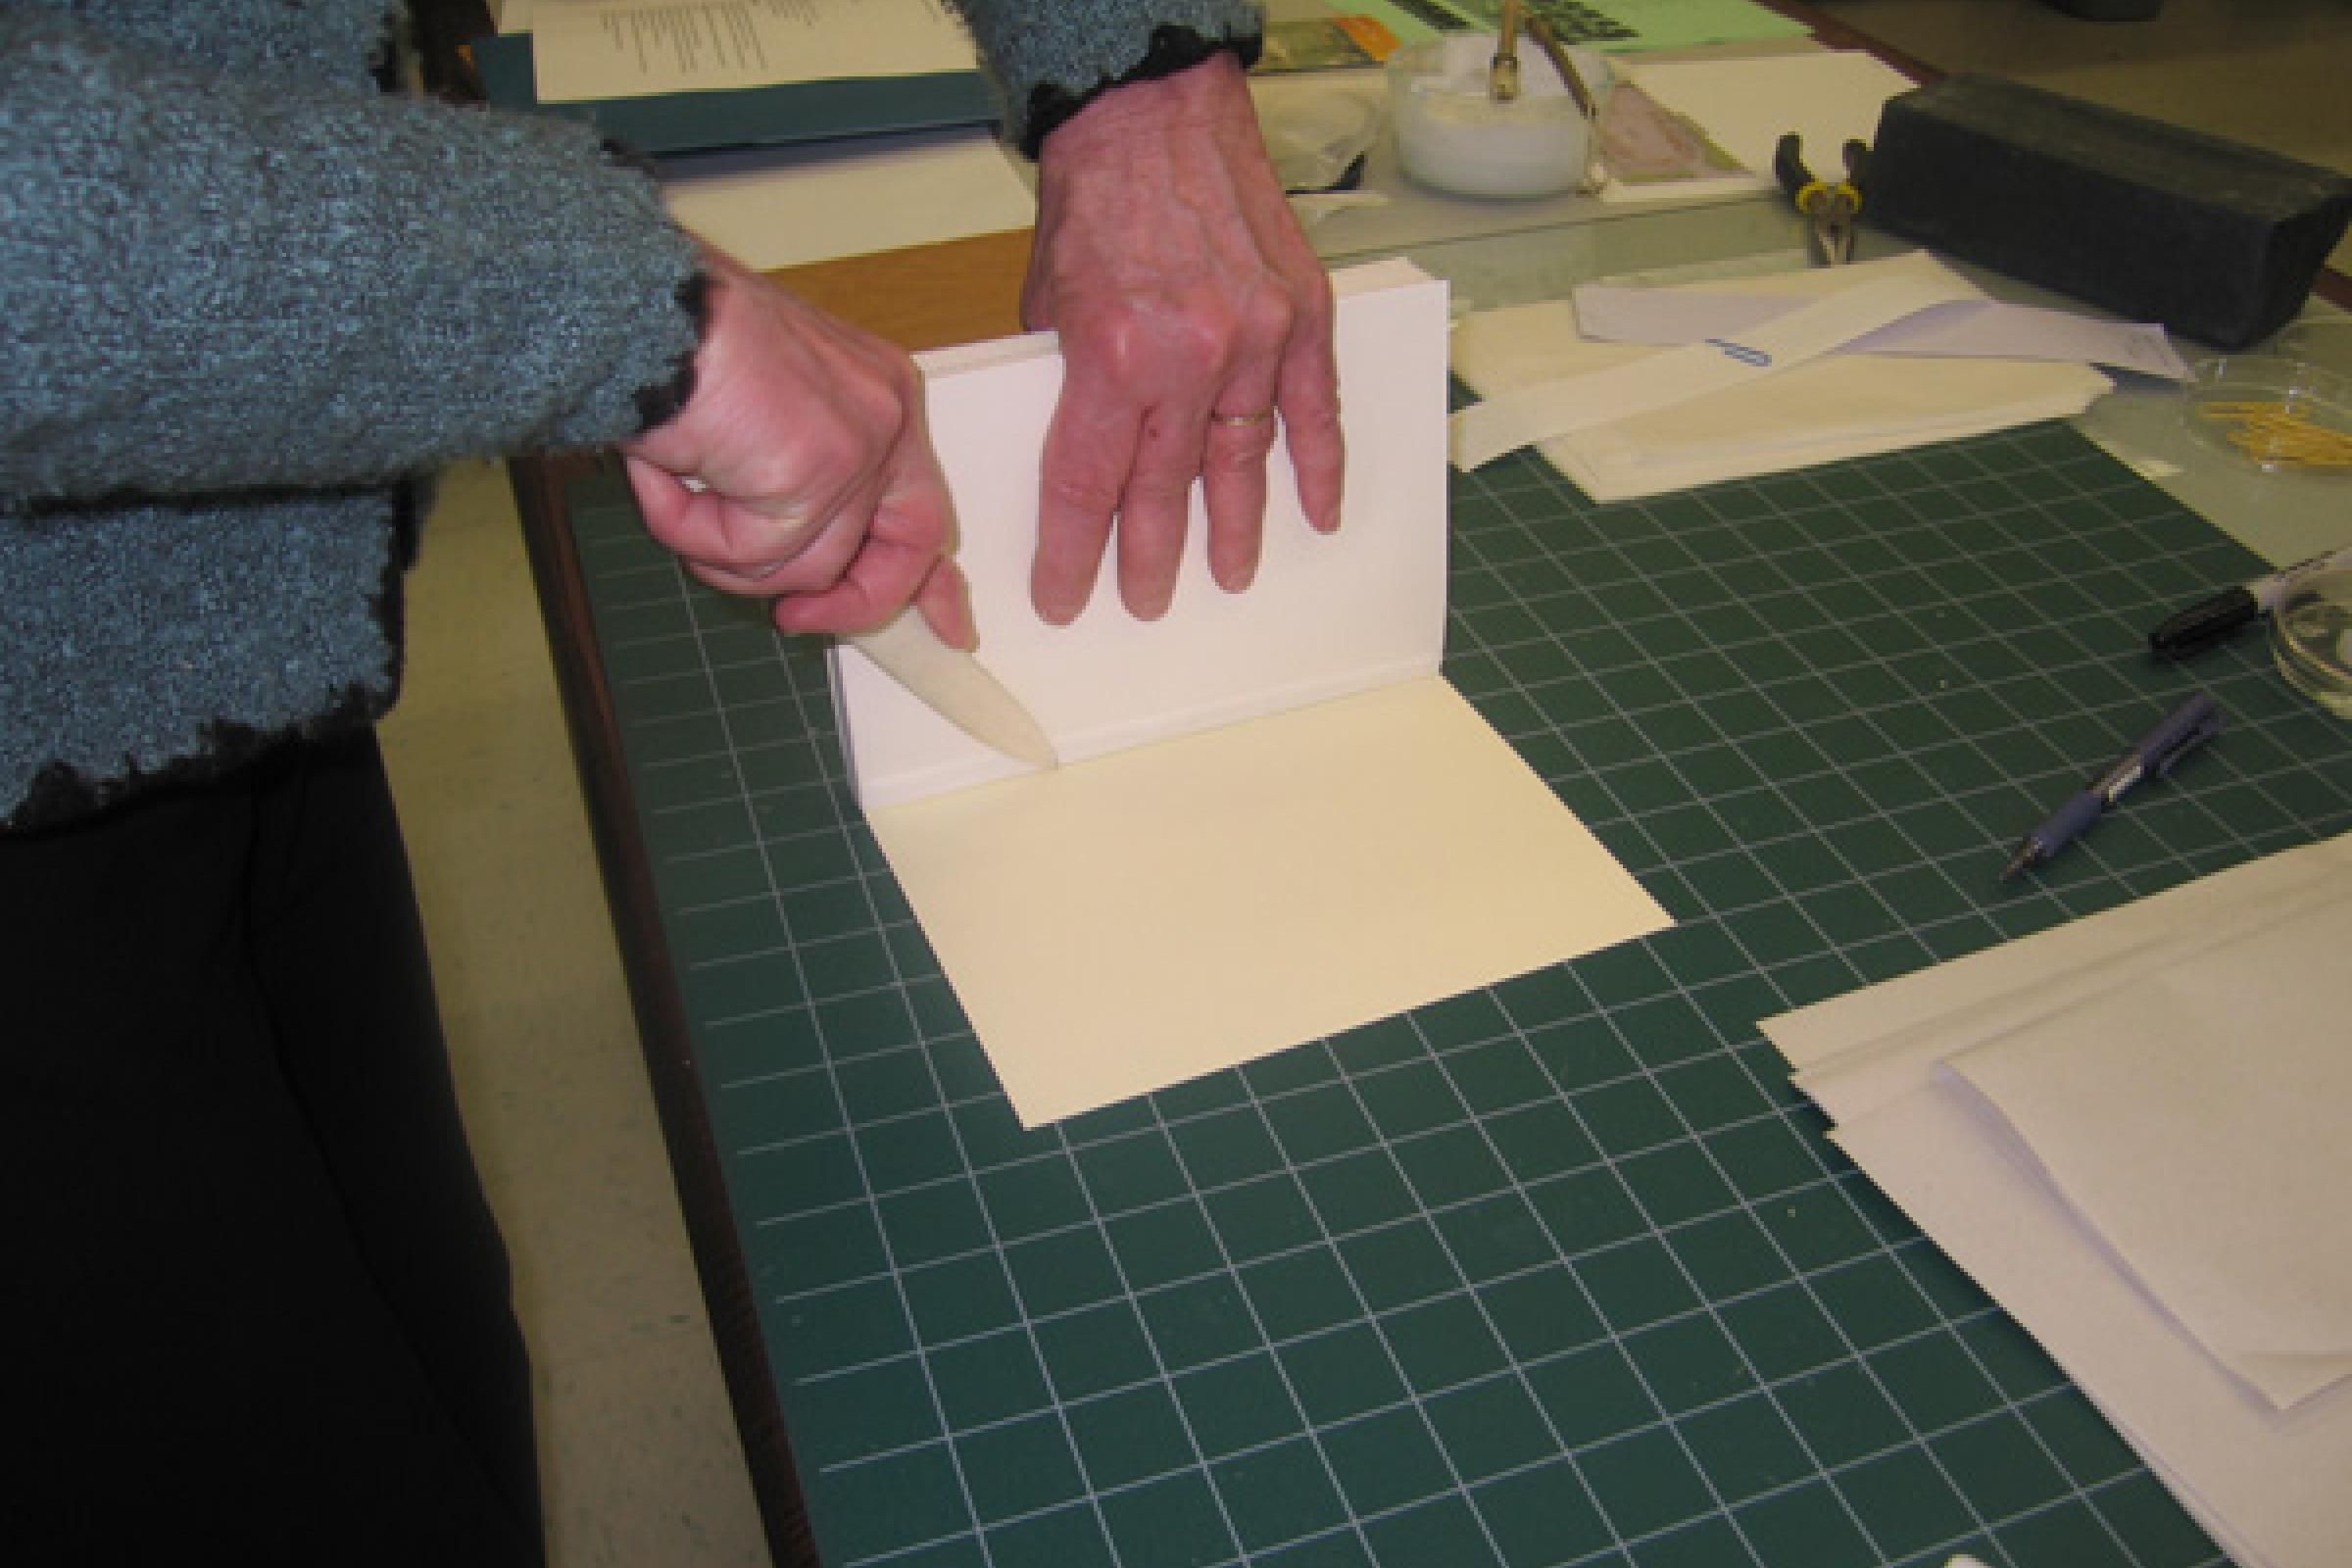 After glueing the strip to the board with PVA, the attachment is further reinforced by applying pressure with a bone folder